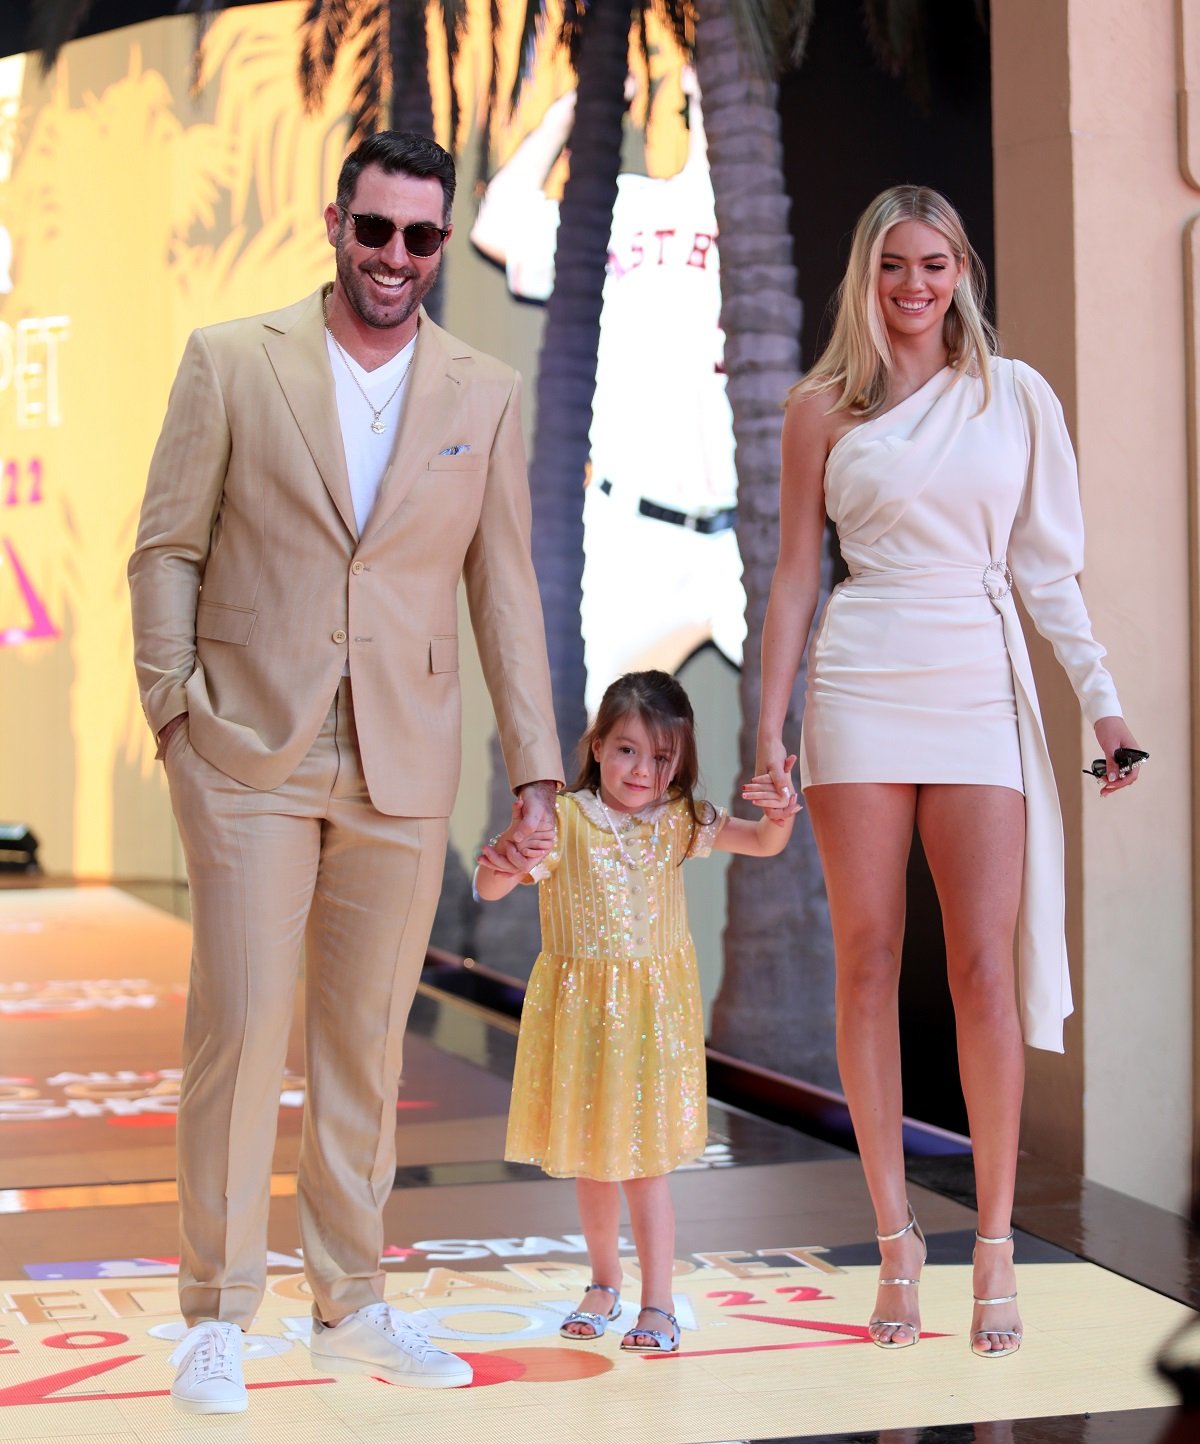 How Much Older Is Justin Verlander Than His Wife Kate Upton?